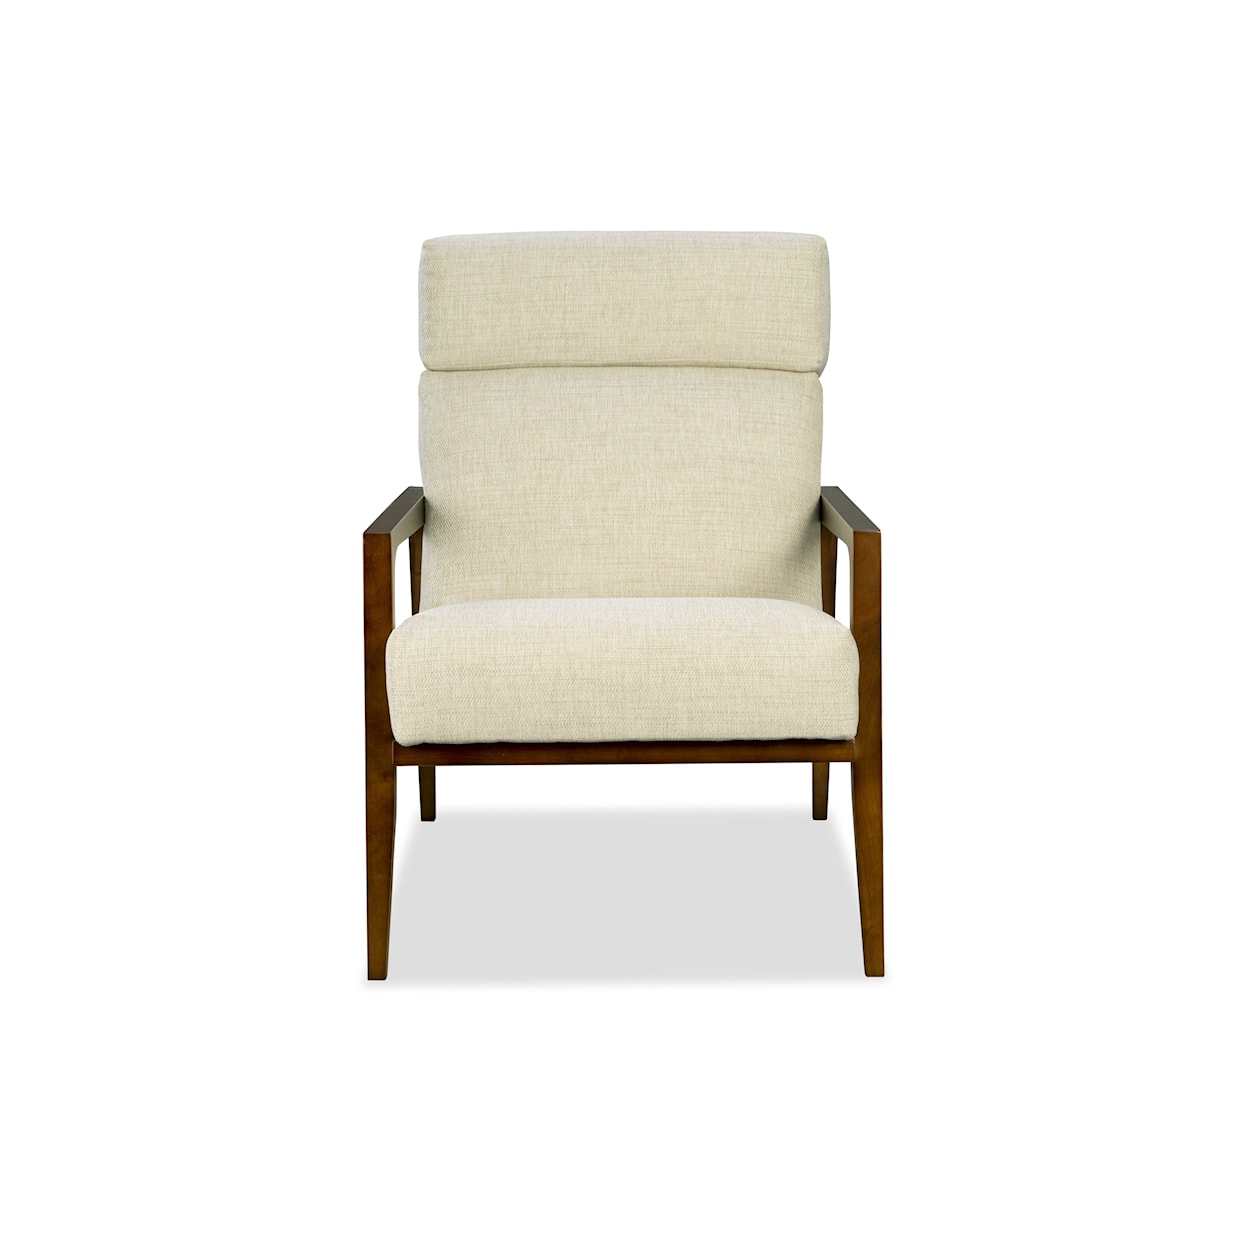 Craftmaster 039110 Accent Chair